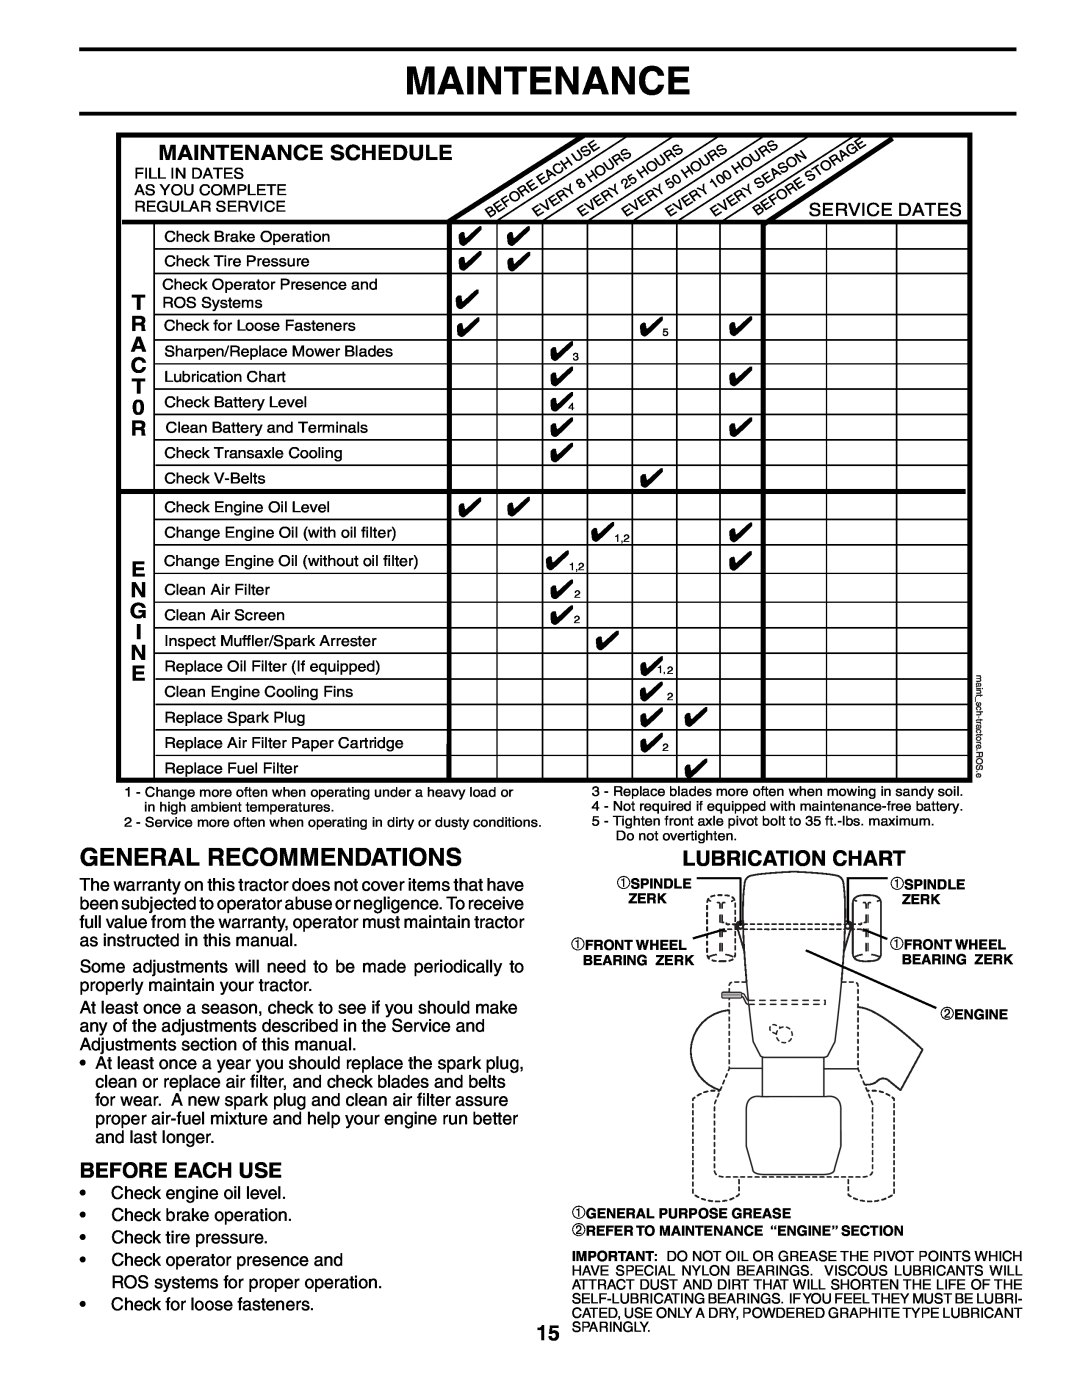 Poulan 195018 manual General Recommendations, Lubrication Chart, Before Each Use, Maintenance Schedule 